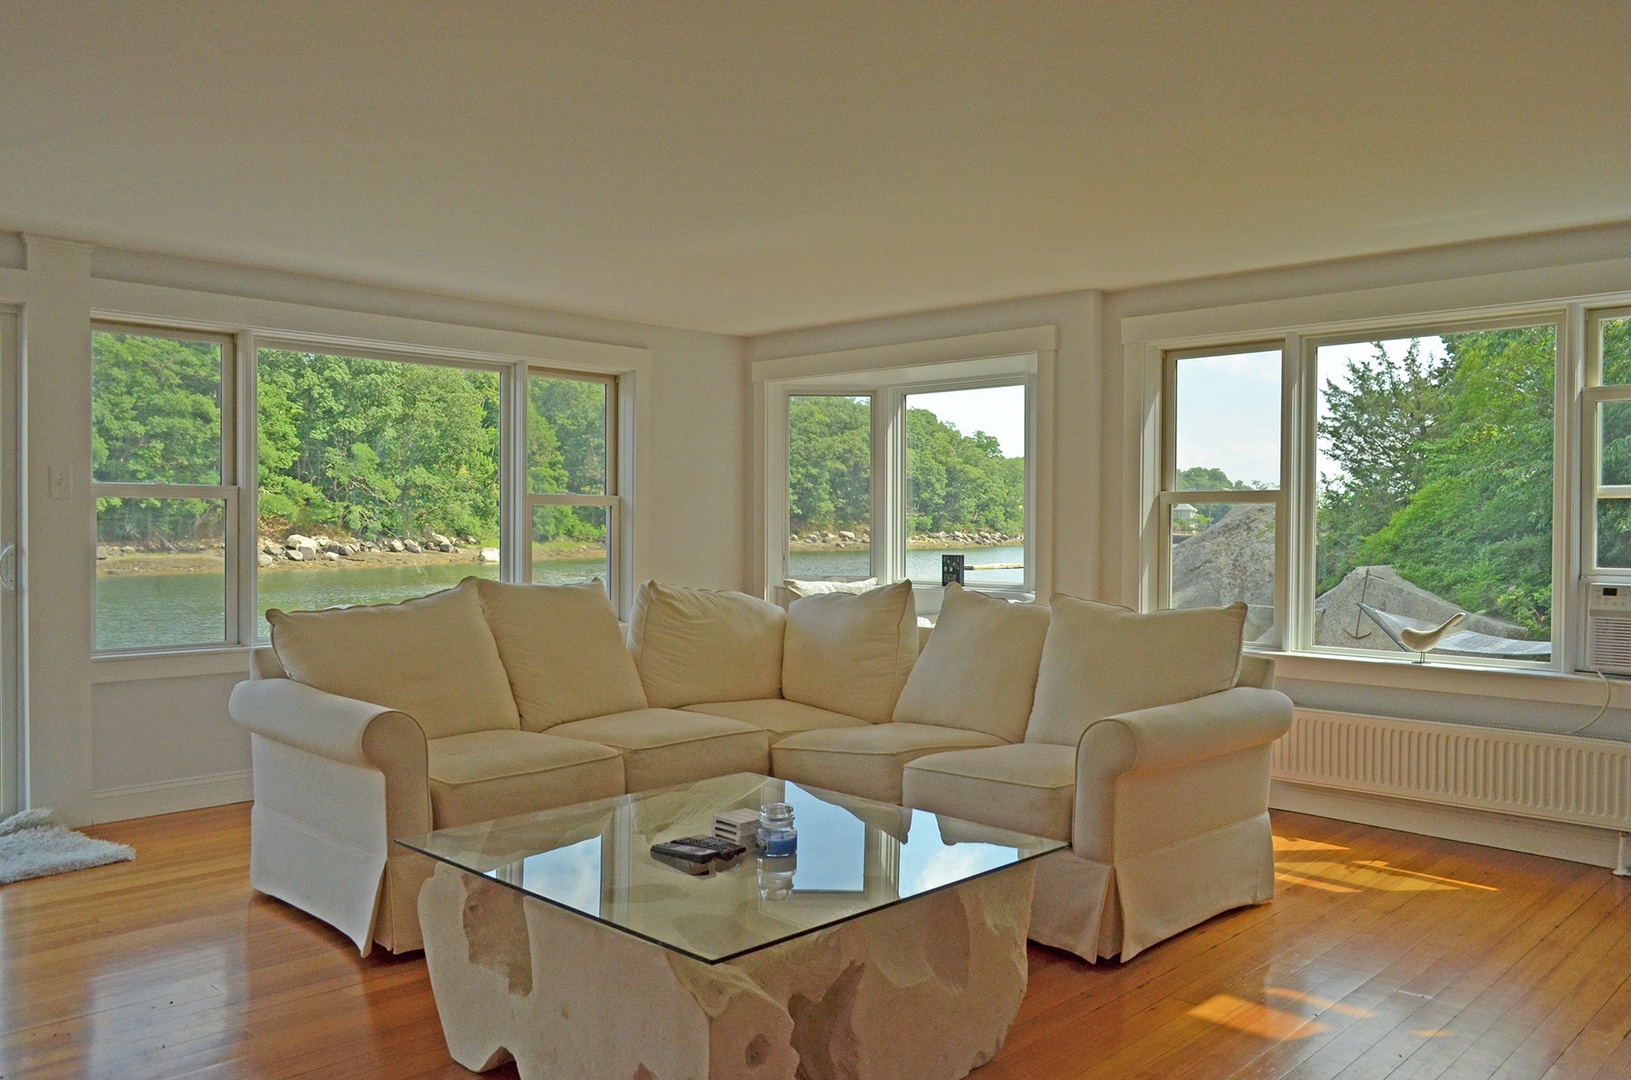 The living area features a cozy sectional sofa and river views.